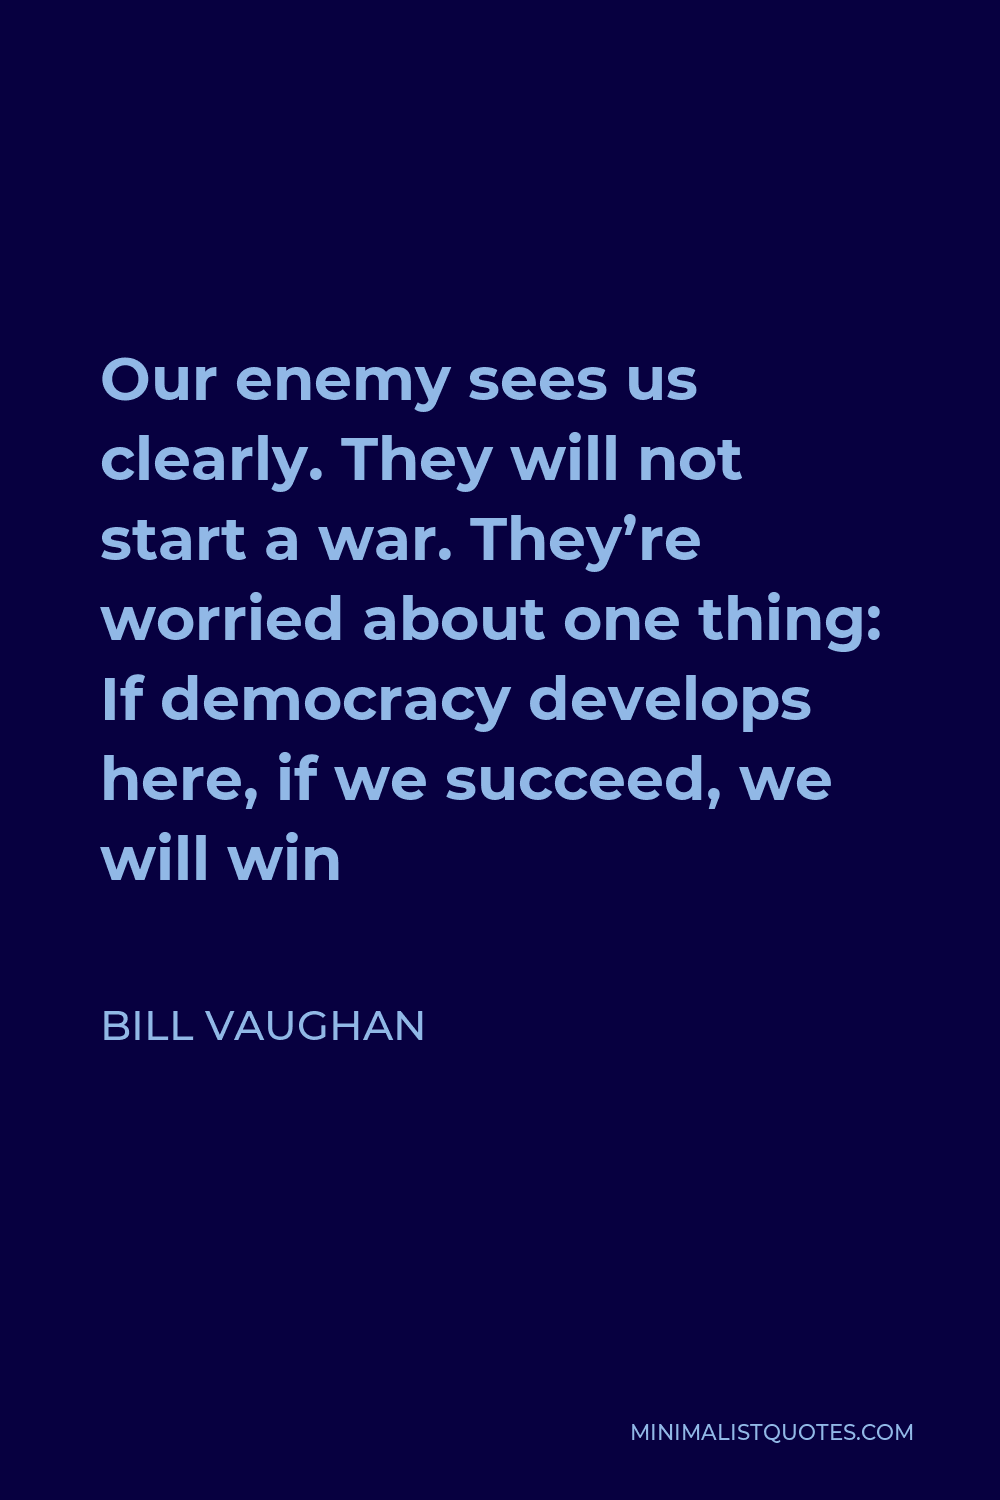 Bill Vaughan Quote - Our enemy sees us clearly. They will not start a war. They’re worried about one thing: If democracy develops here, if we succeed, we will win